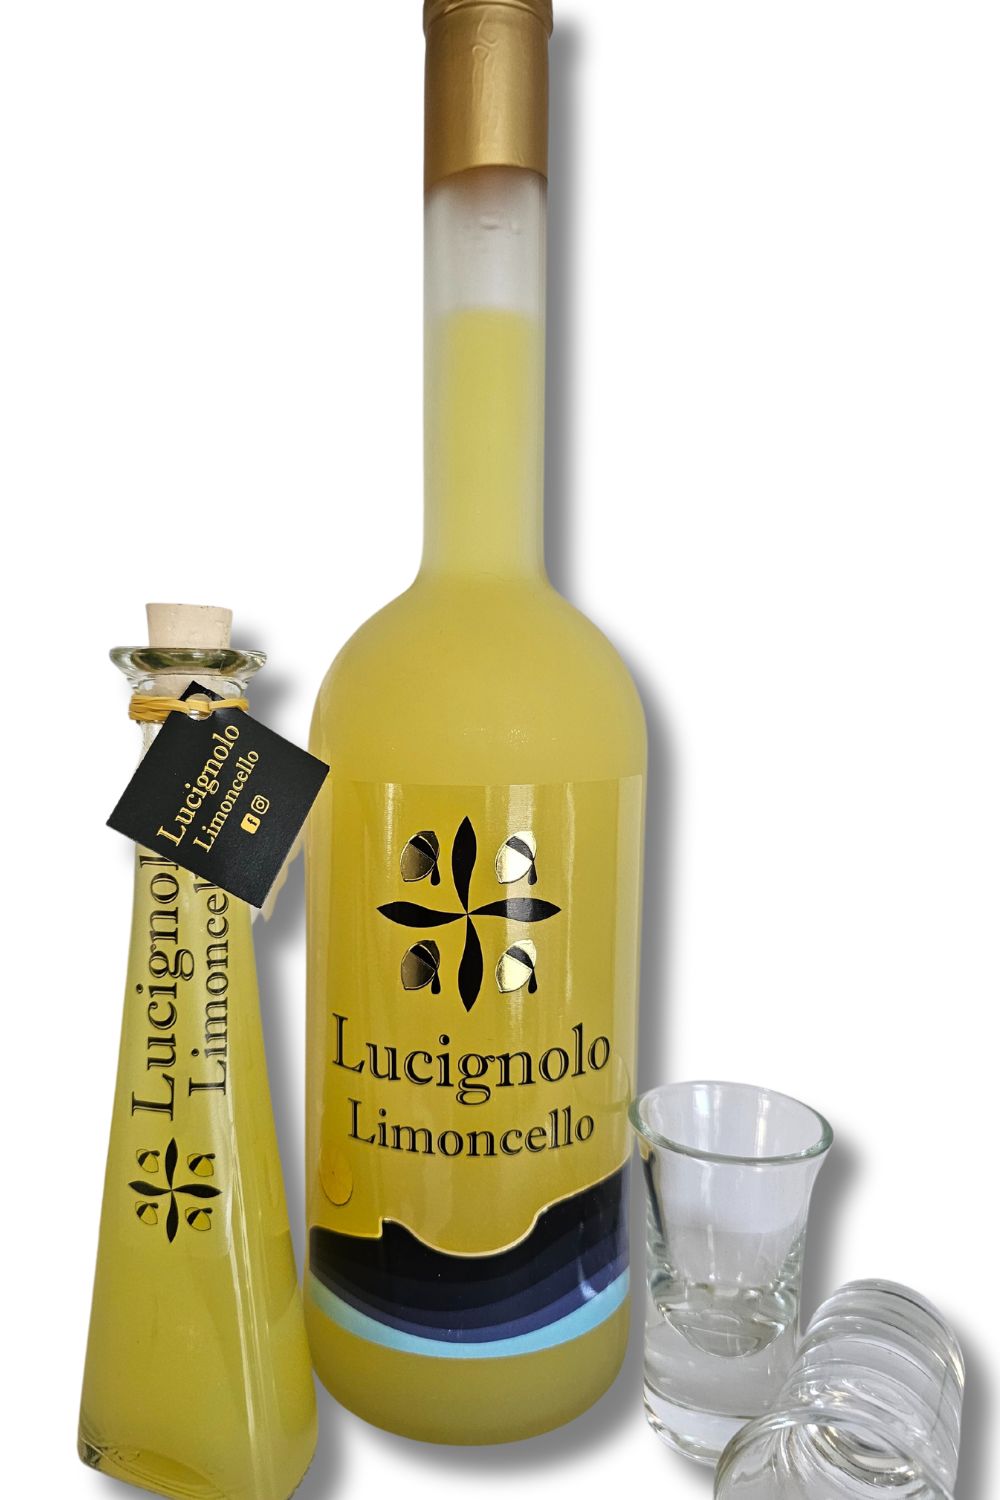 Lucignolo Limoncello Experience: A Bottle, A Mini, and Glasses to Toast